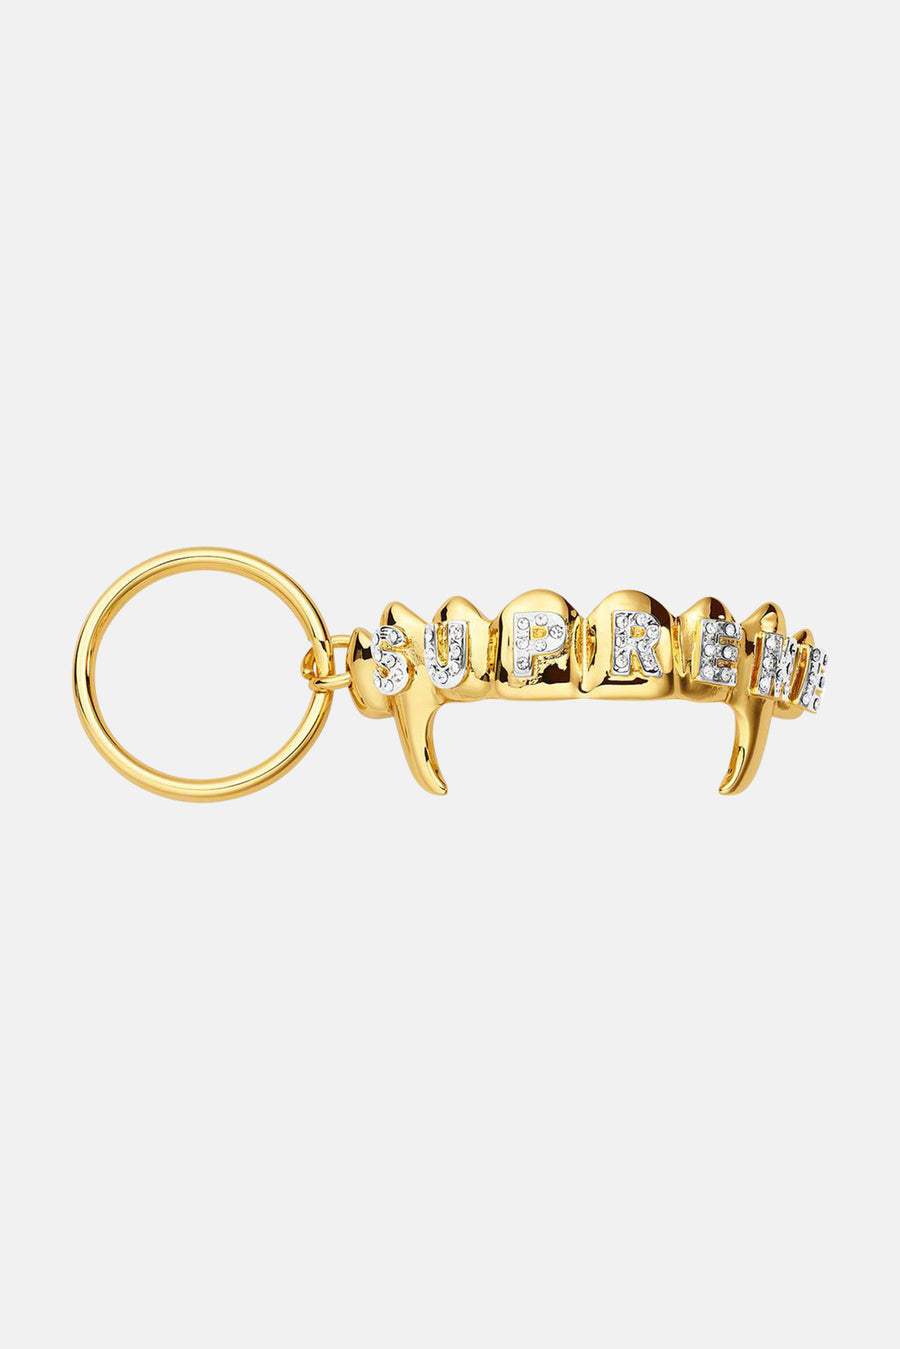 Supreme Fronts Grill Keychain